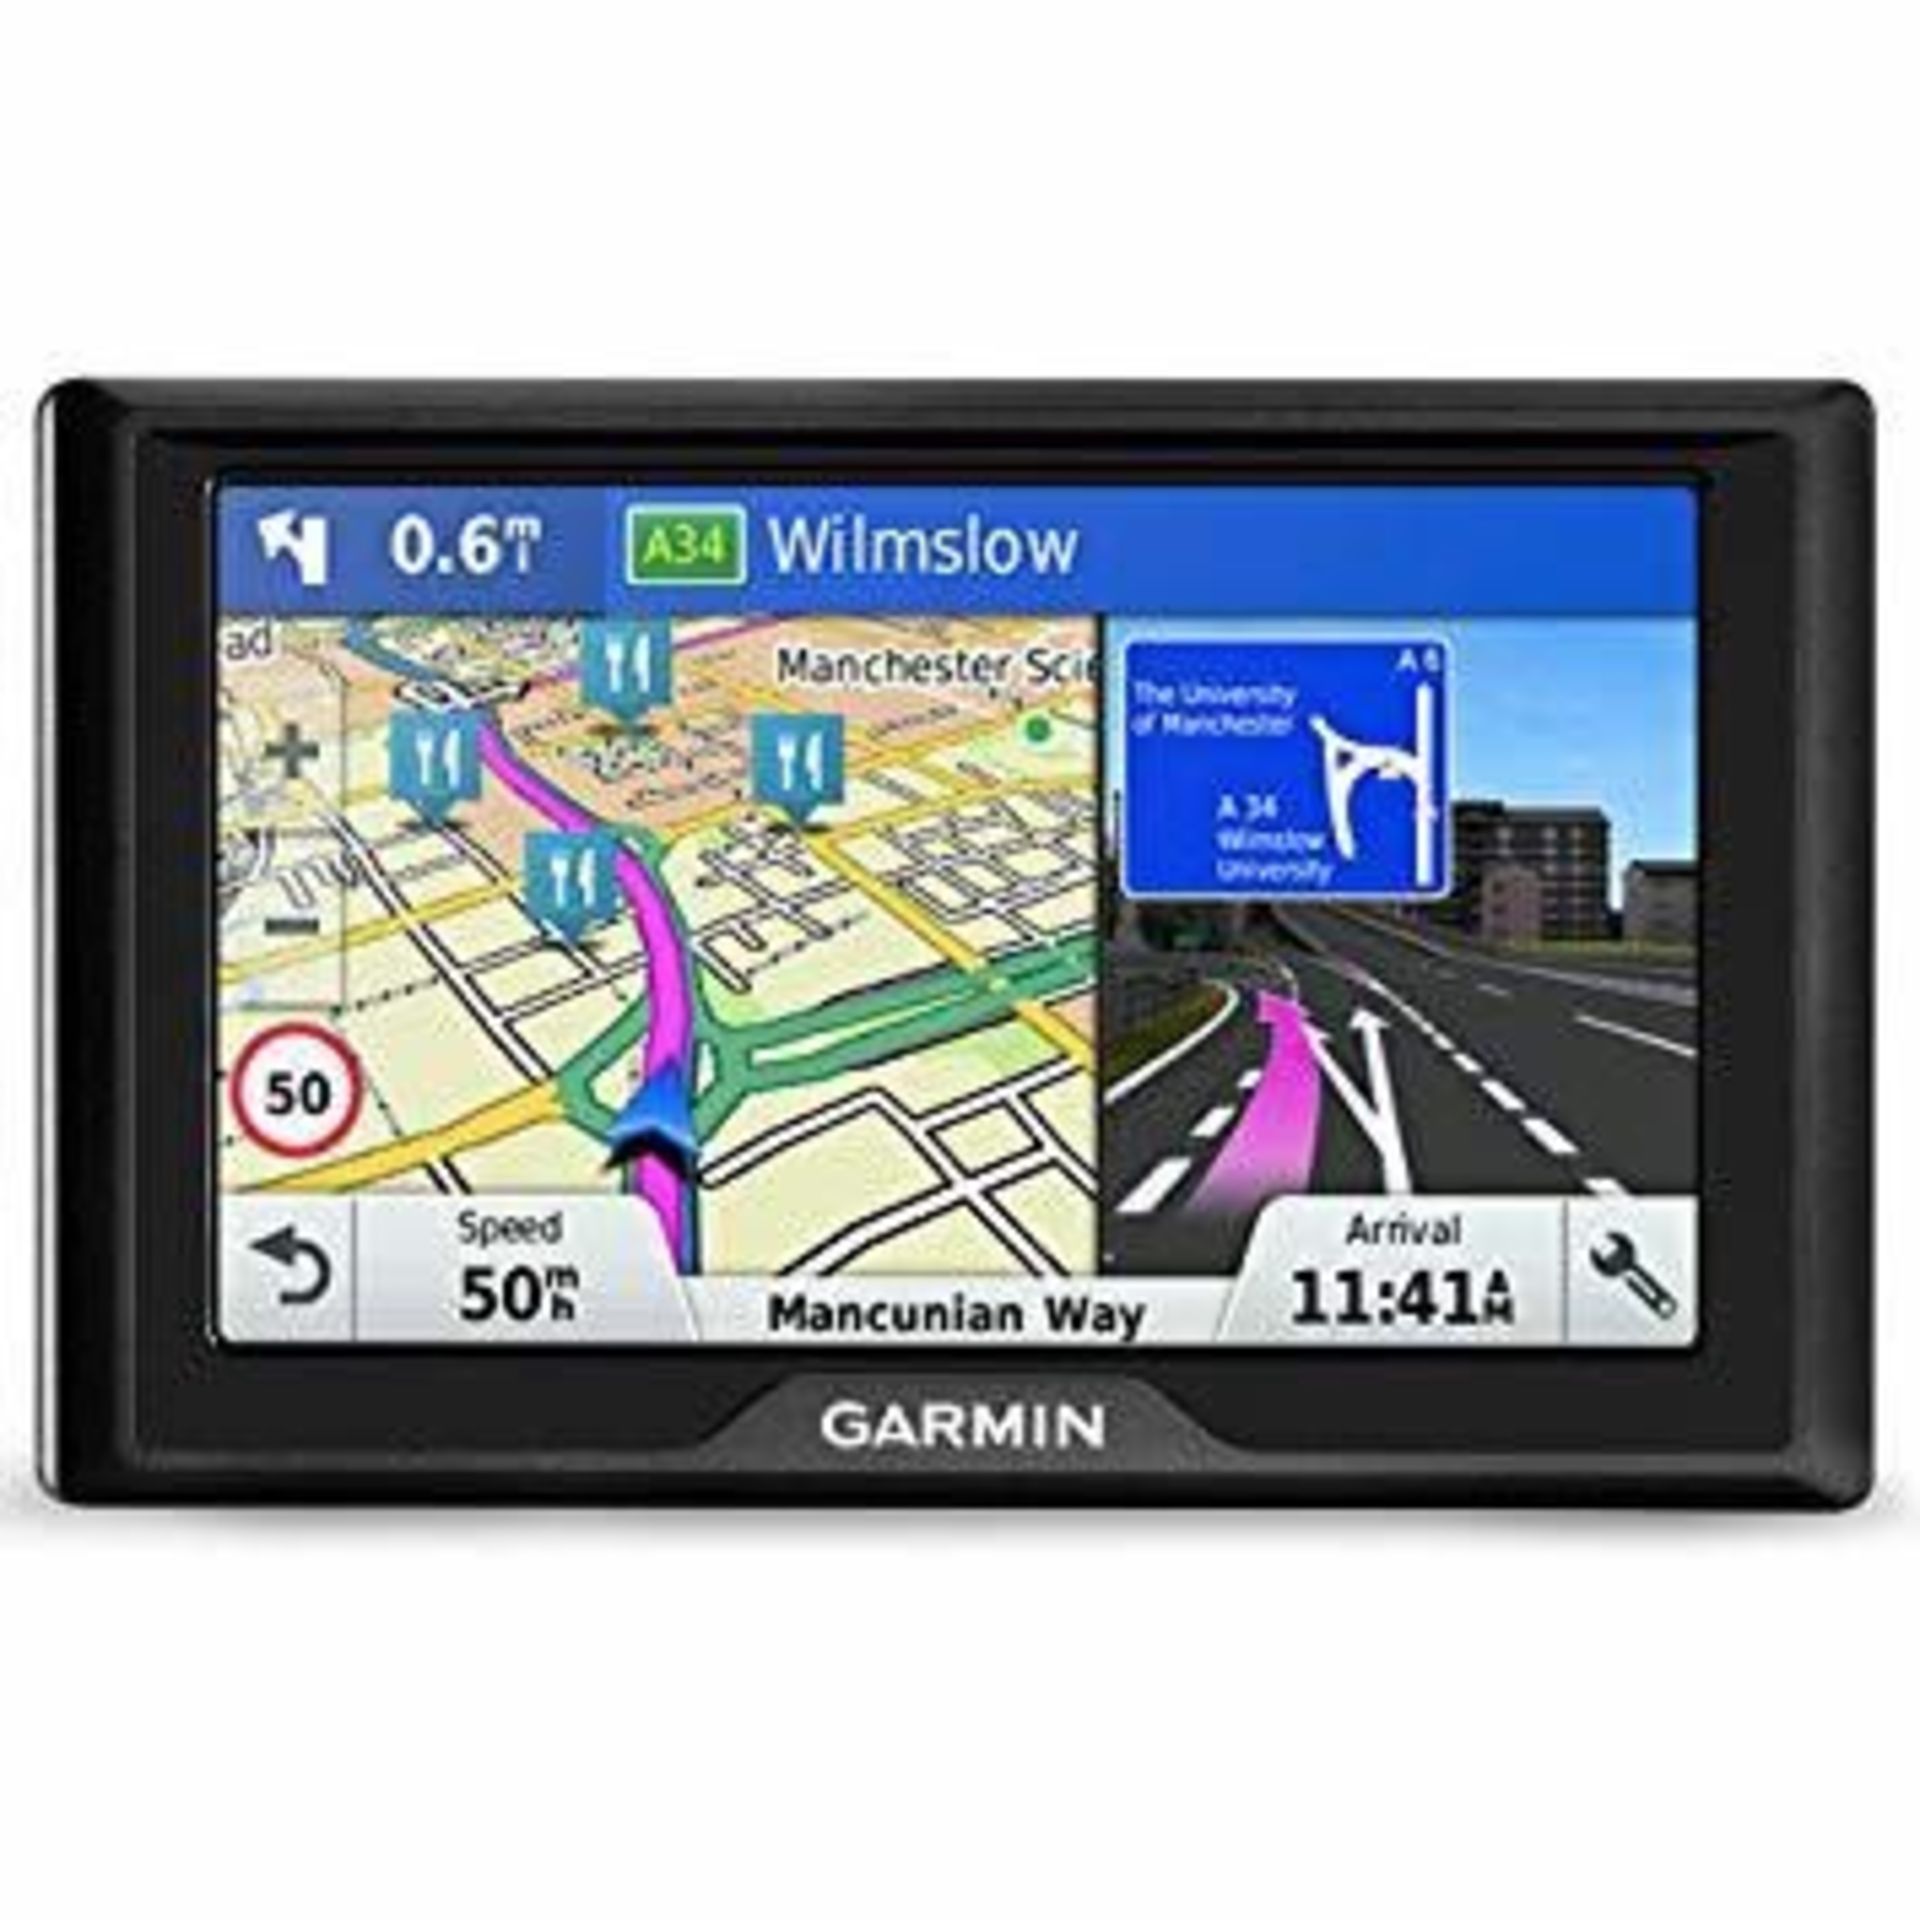 15 Boxed unused Garmin 51 LMT-S Satellite Navigation Systems, BrightHouse model number PEGARLMTS